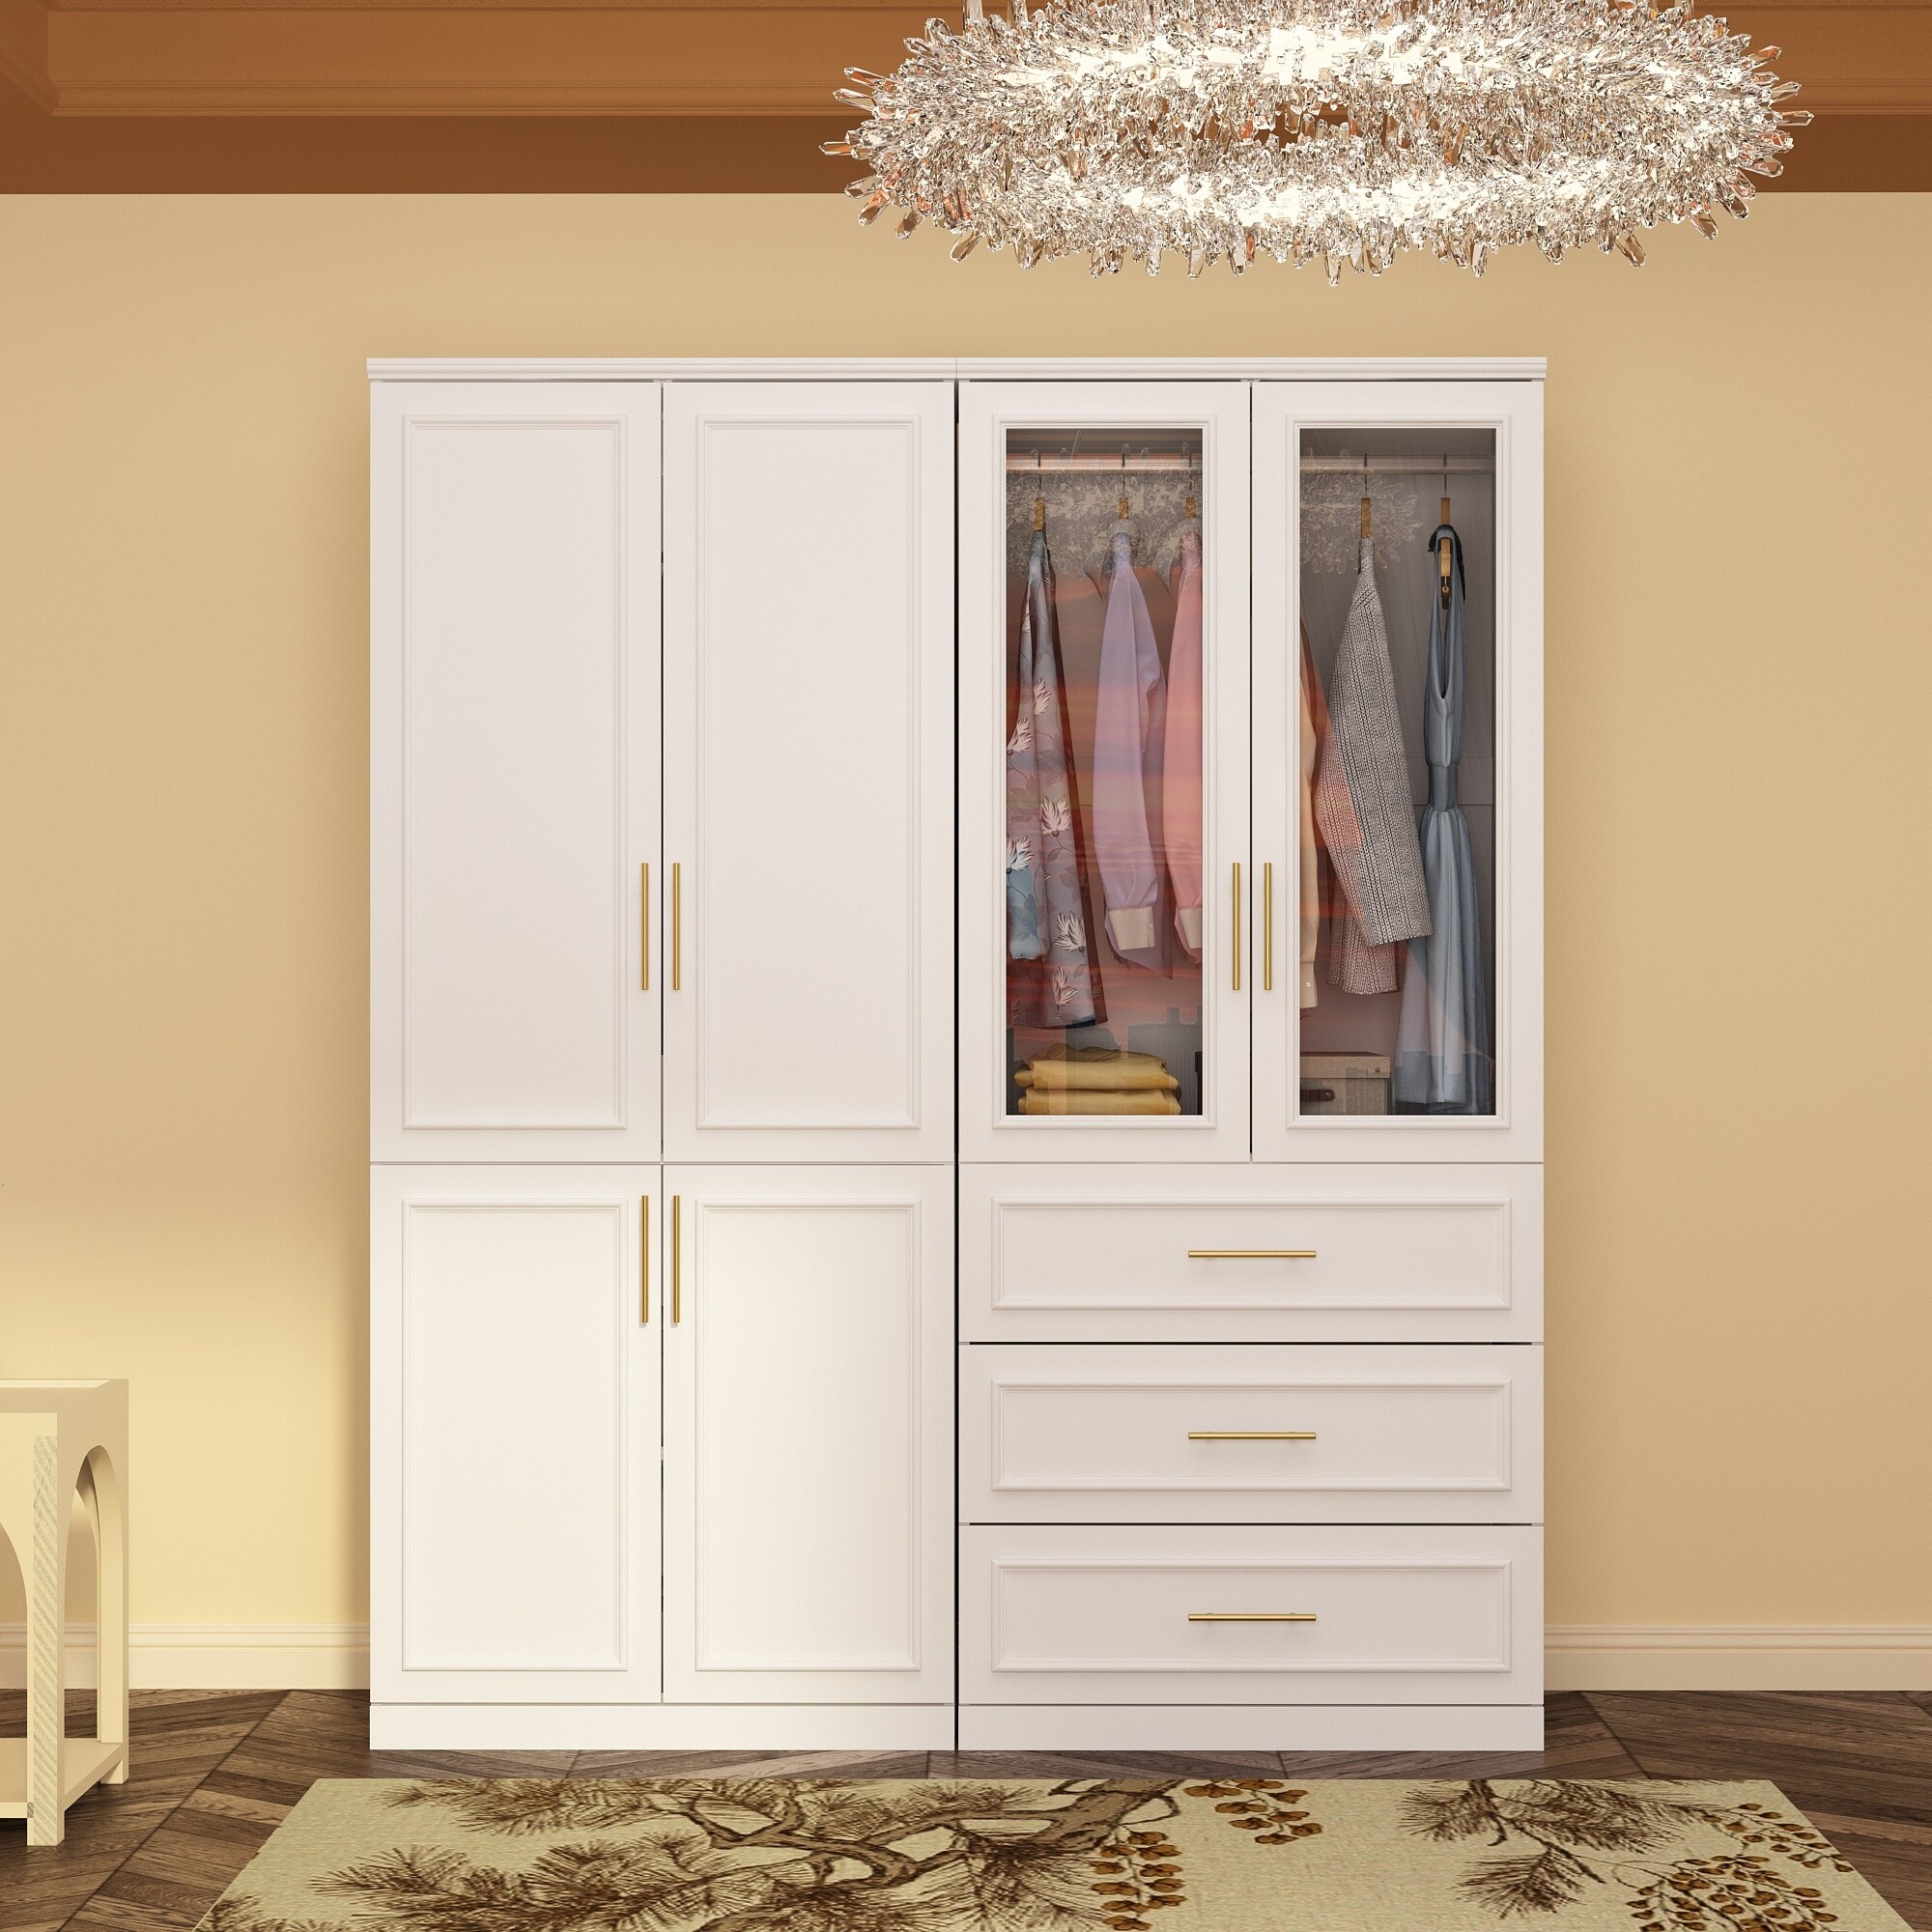 https://ak1.ostkcdn.com/images/products/is/images/direct/c58eee53f2fa045ee3668c867f9043d21fae860b/Modular-Wardrobe-Combo-Armoires-Closet-Freestanding-Cabinet-Organizer.jpg